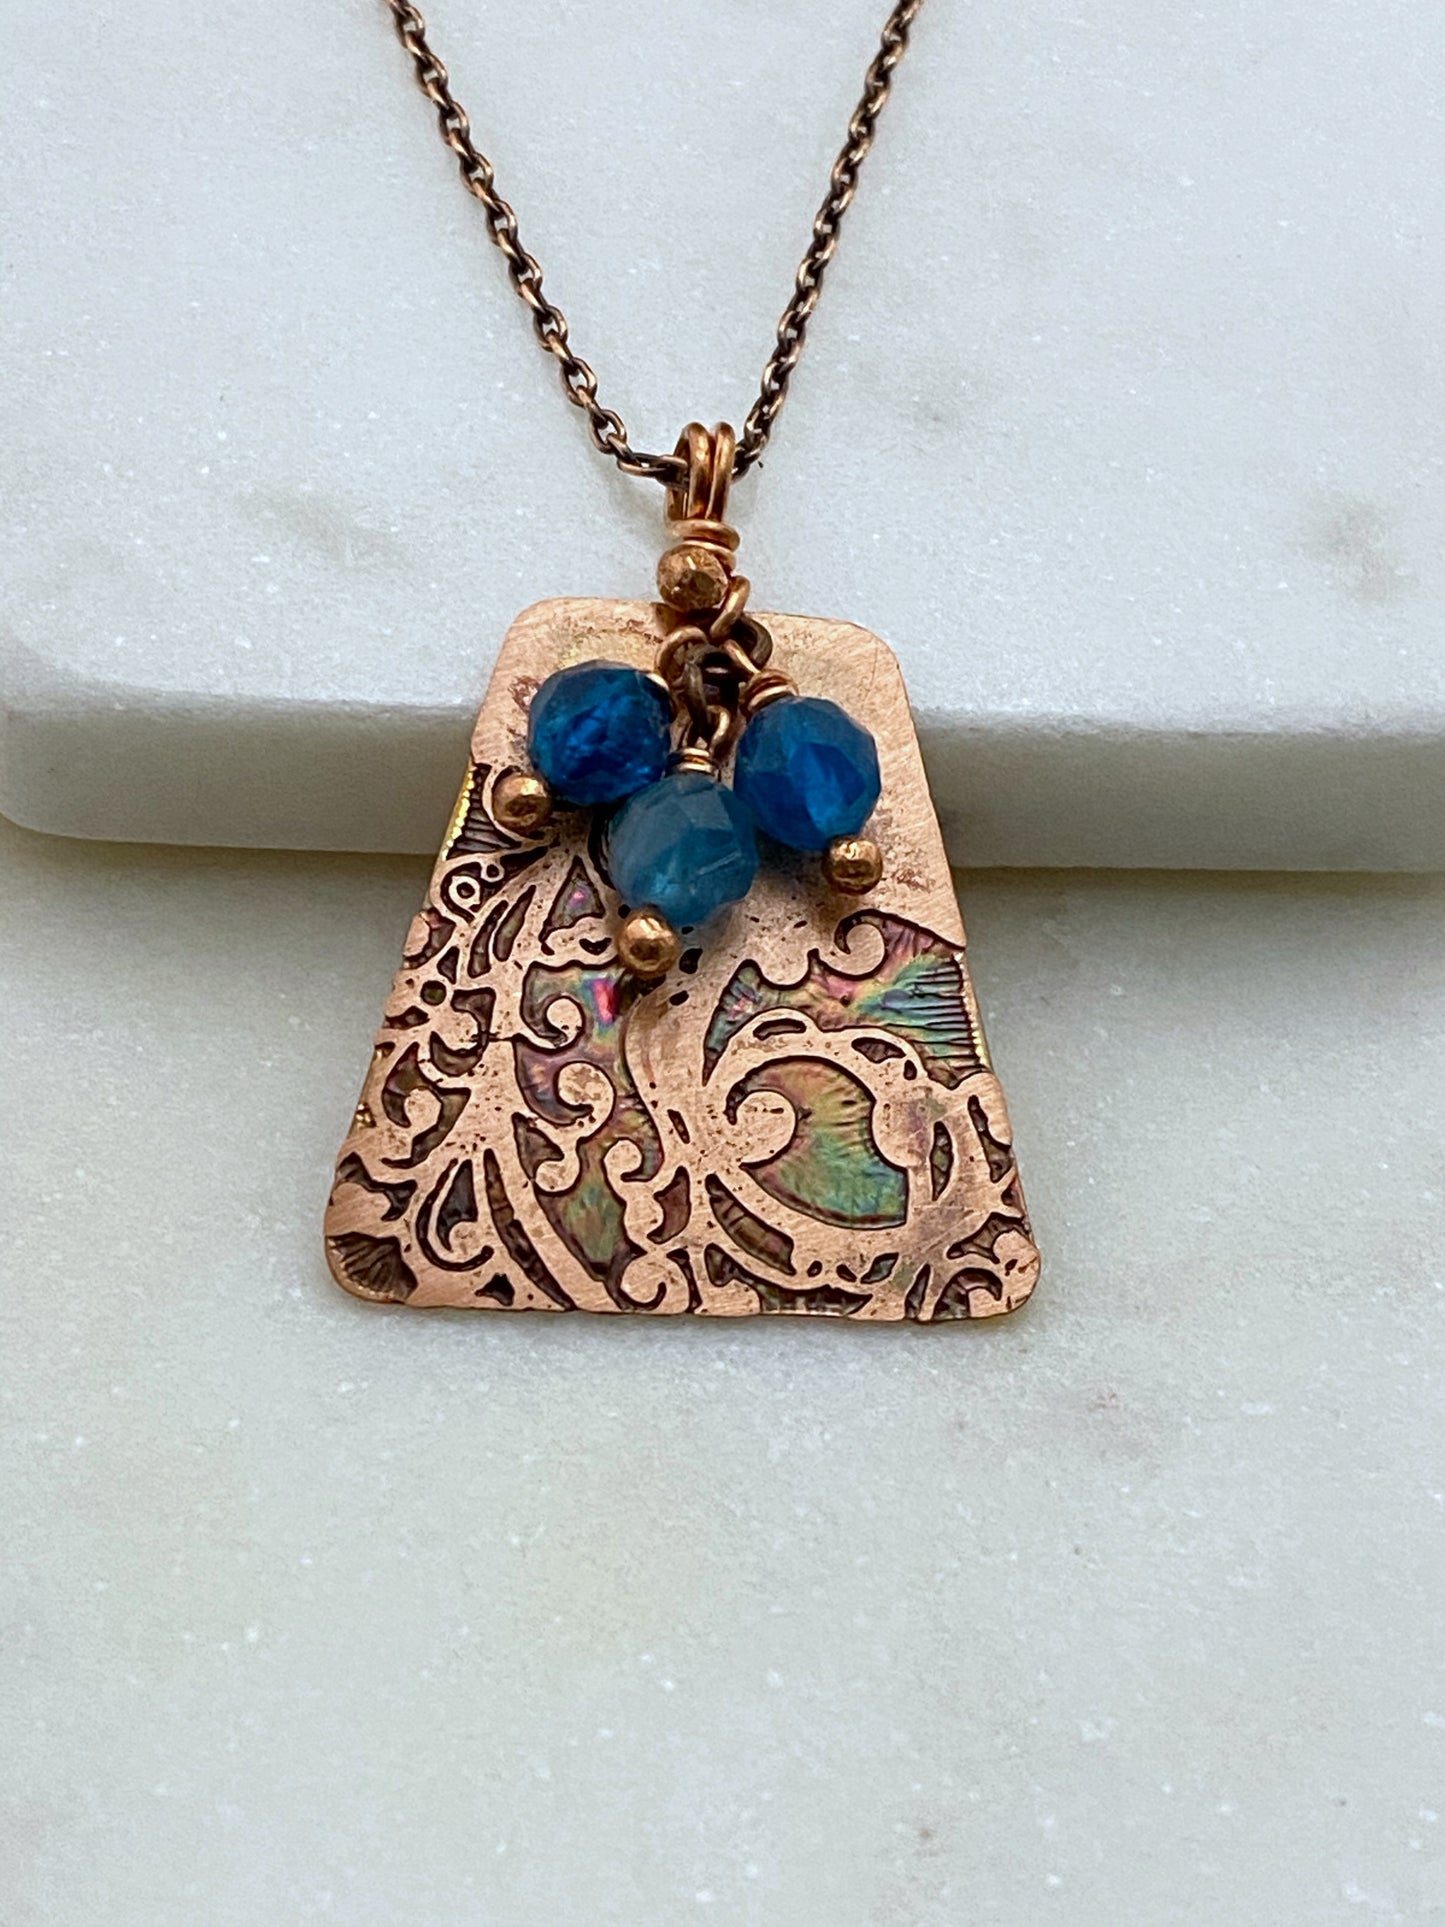 Acid etched copper necklace with apatite gemstones